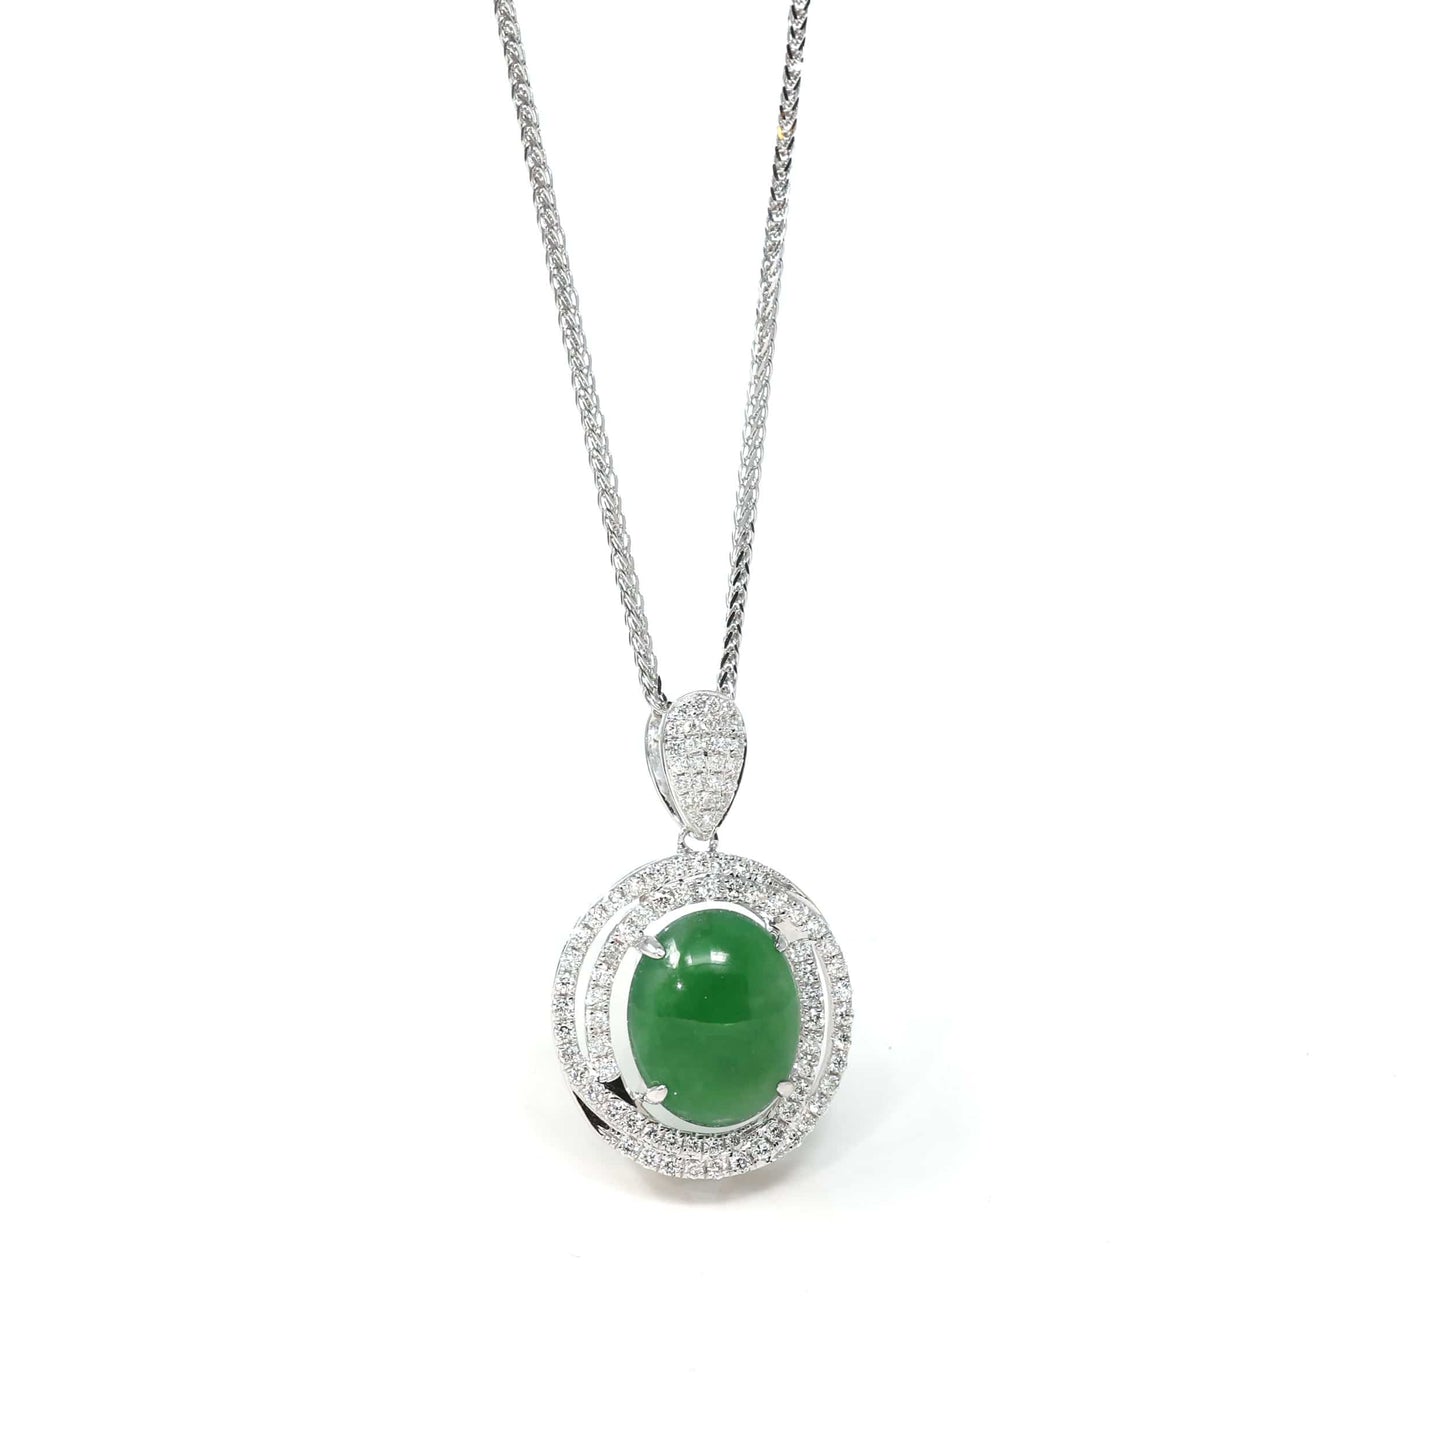 RealJade Co. 18k Gold Jadeite Necklace 18K White Gold Oval Imperial Jadeite Jade Cabochon Necklace with Diamonds